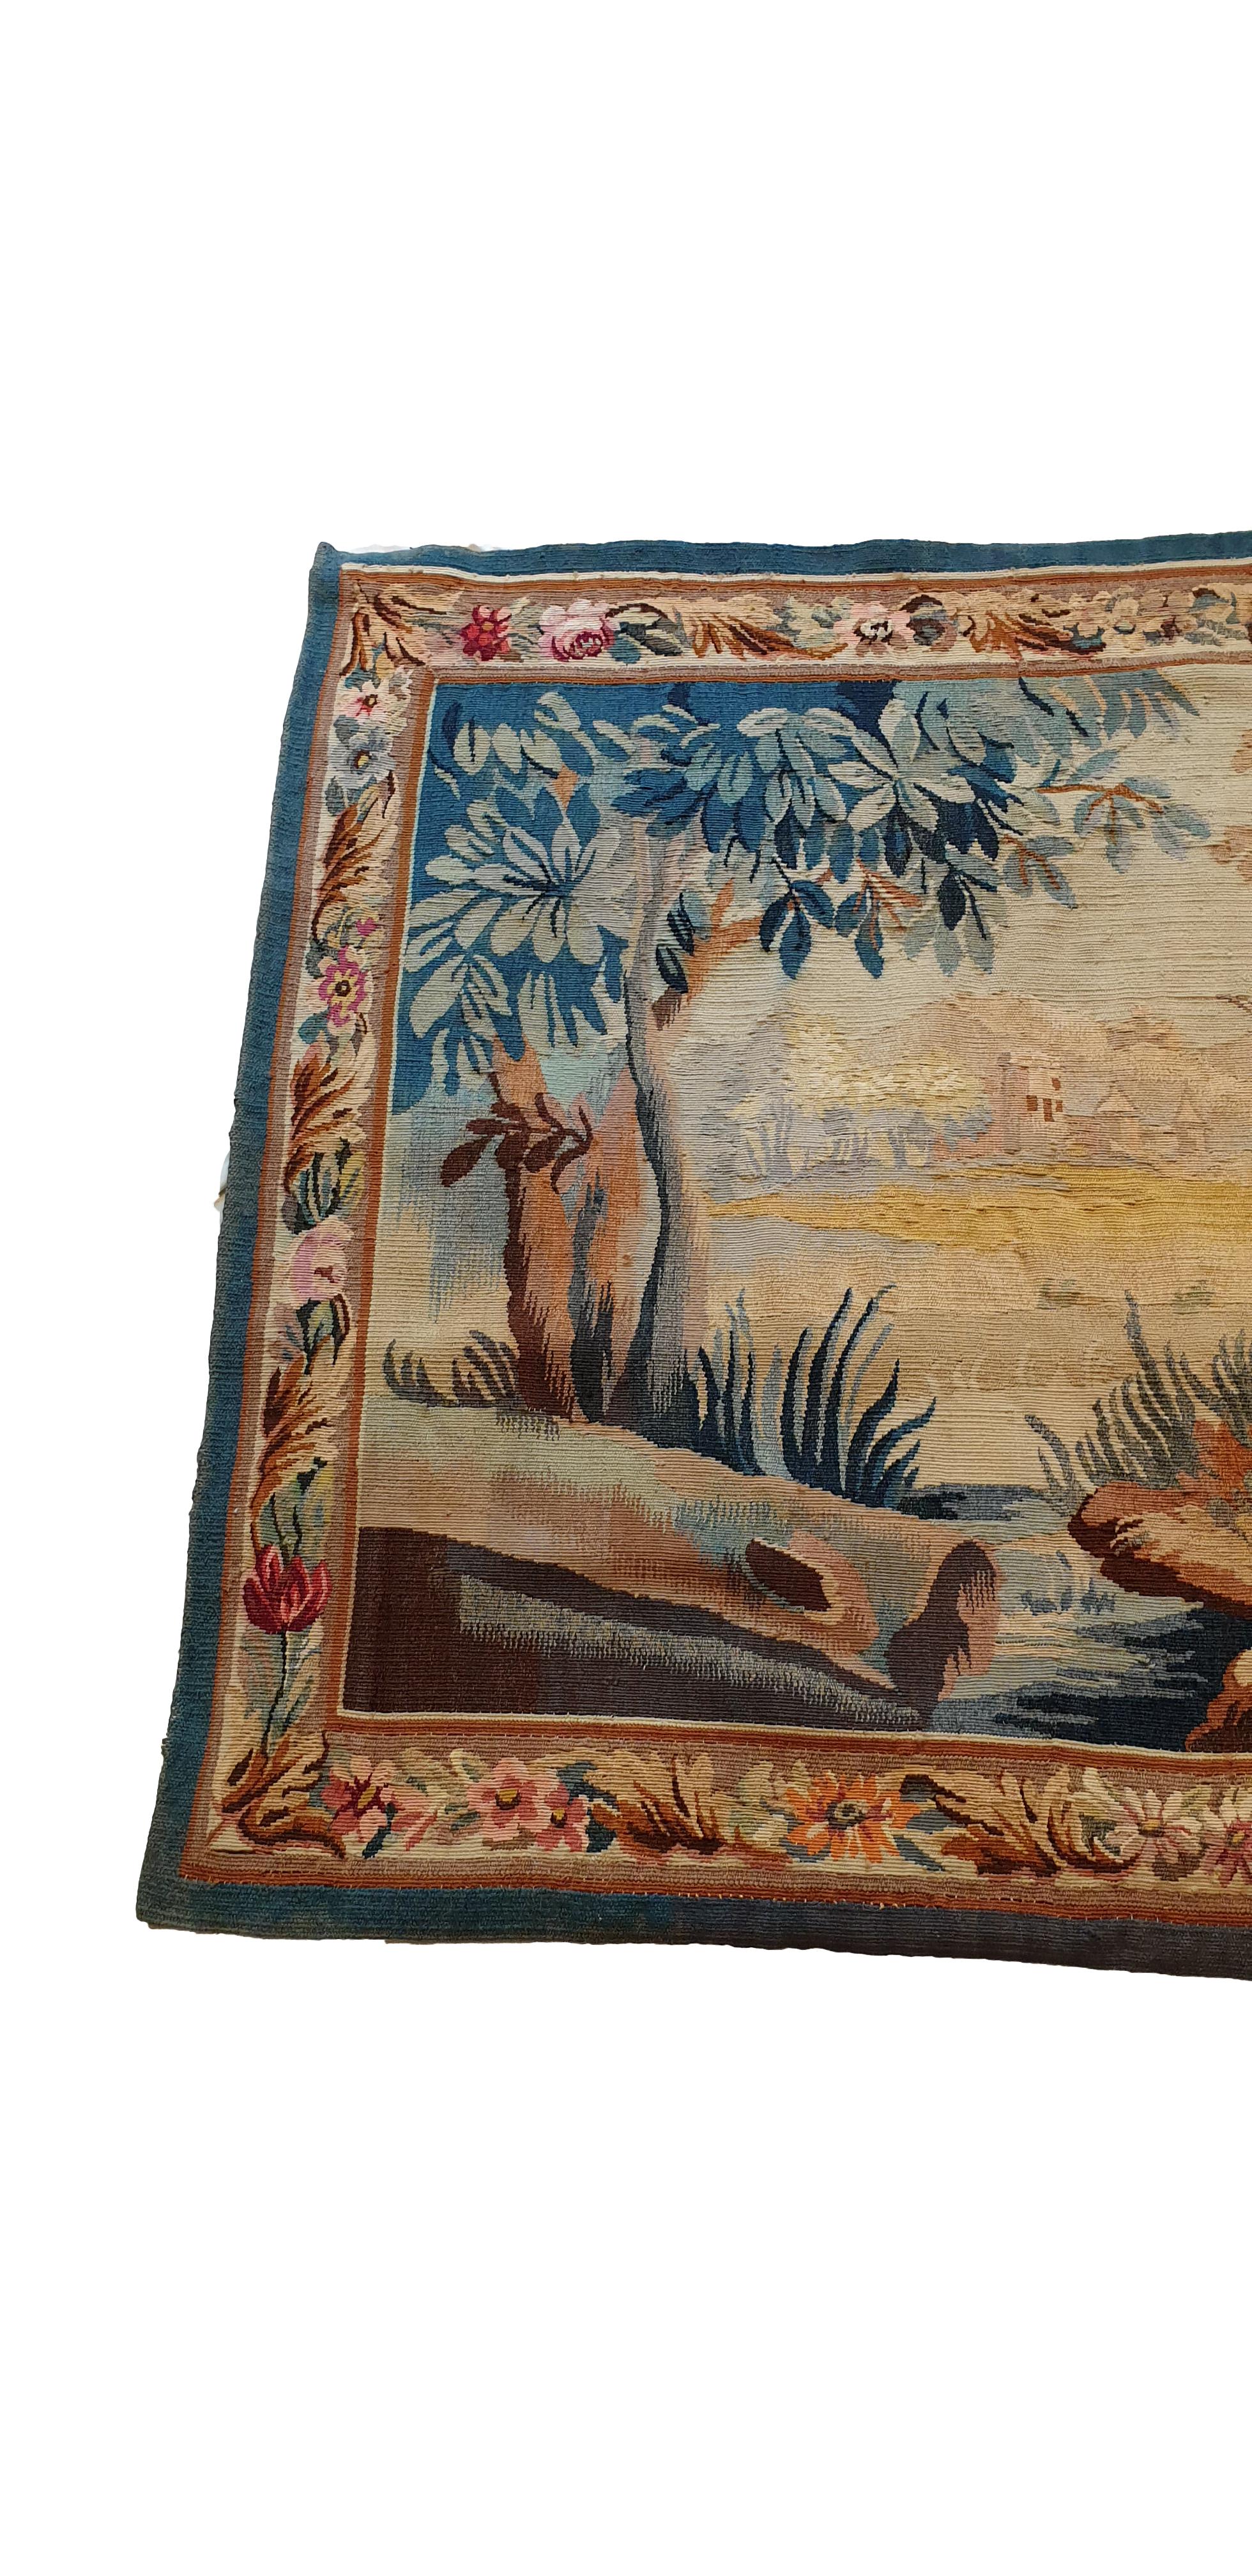 Hand-Woven 20th Century Aubusson Tapestry 